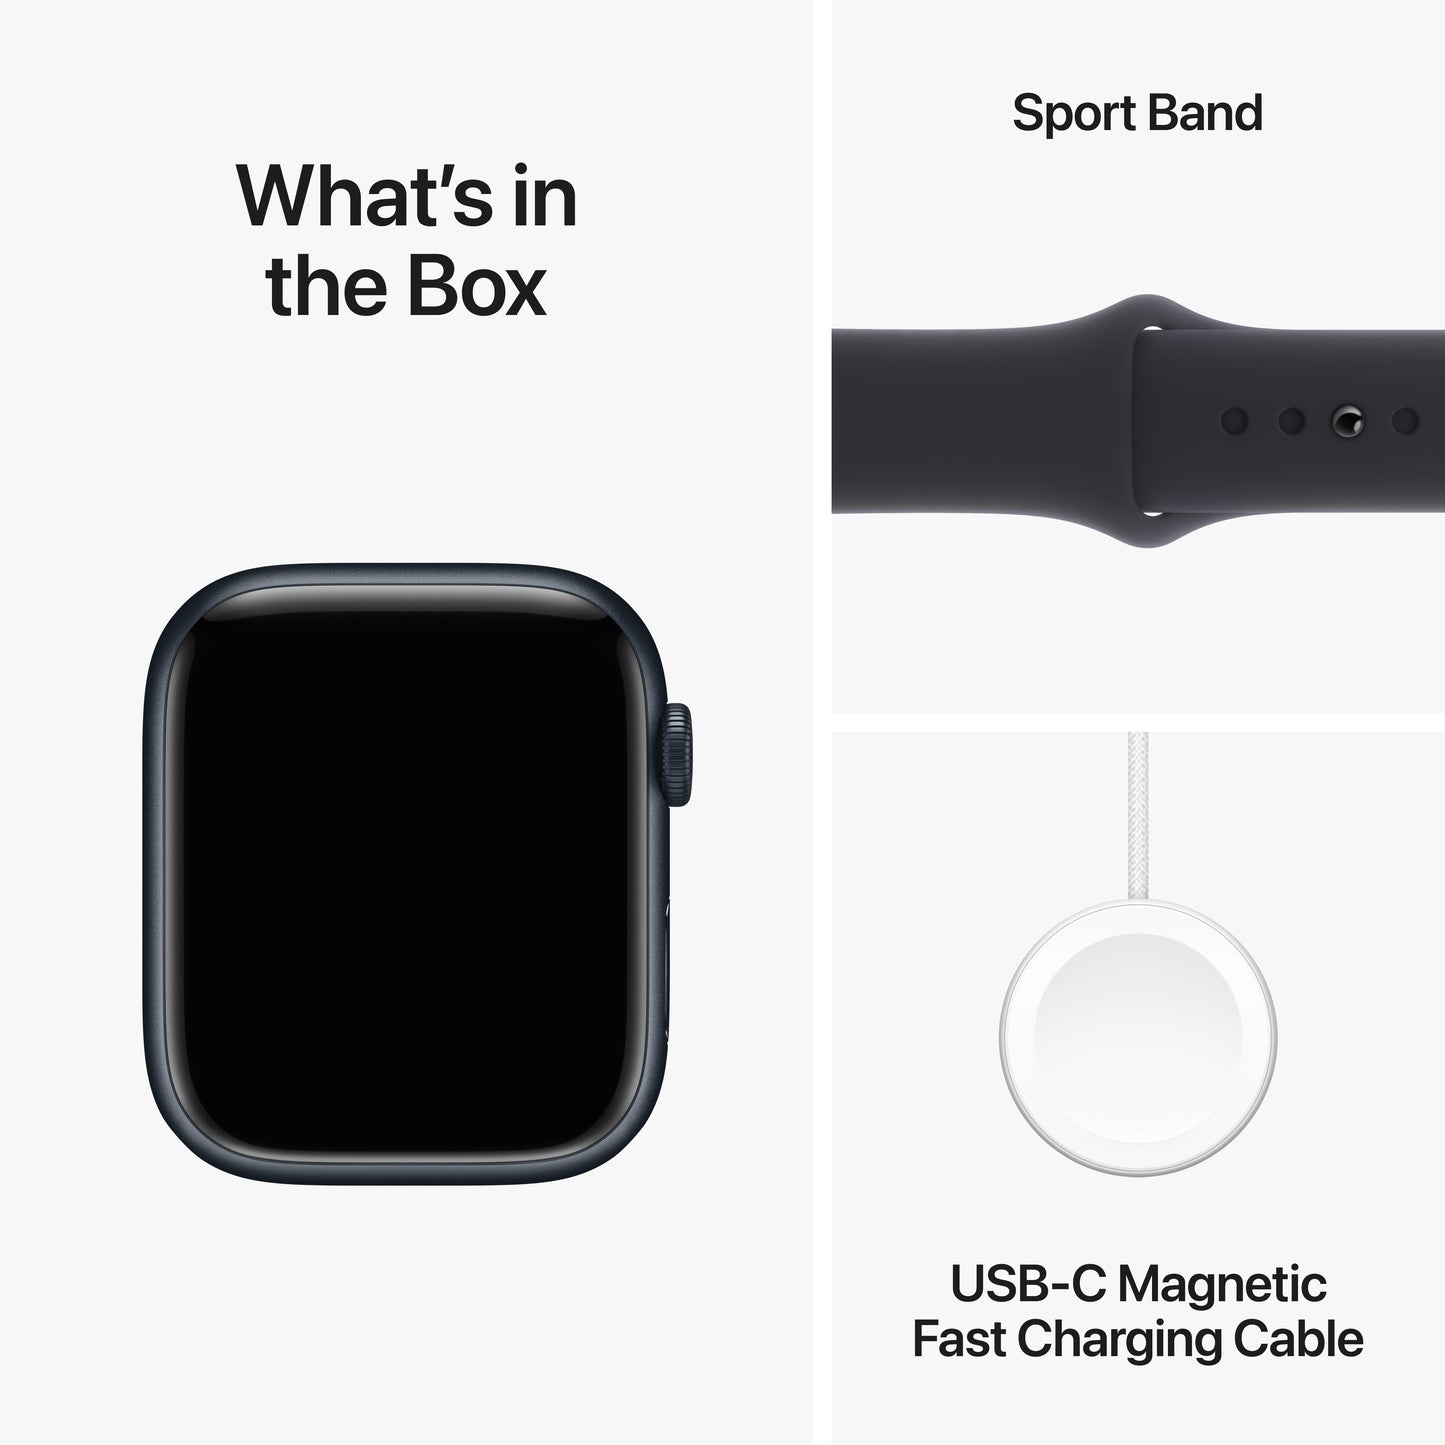 Apple Watch Series 9 GPS 45mm Midnight Aluminum Case with Midnight Sport Band - S/M